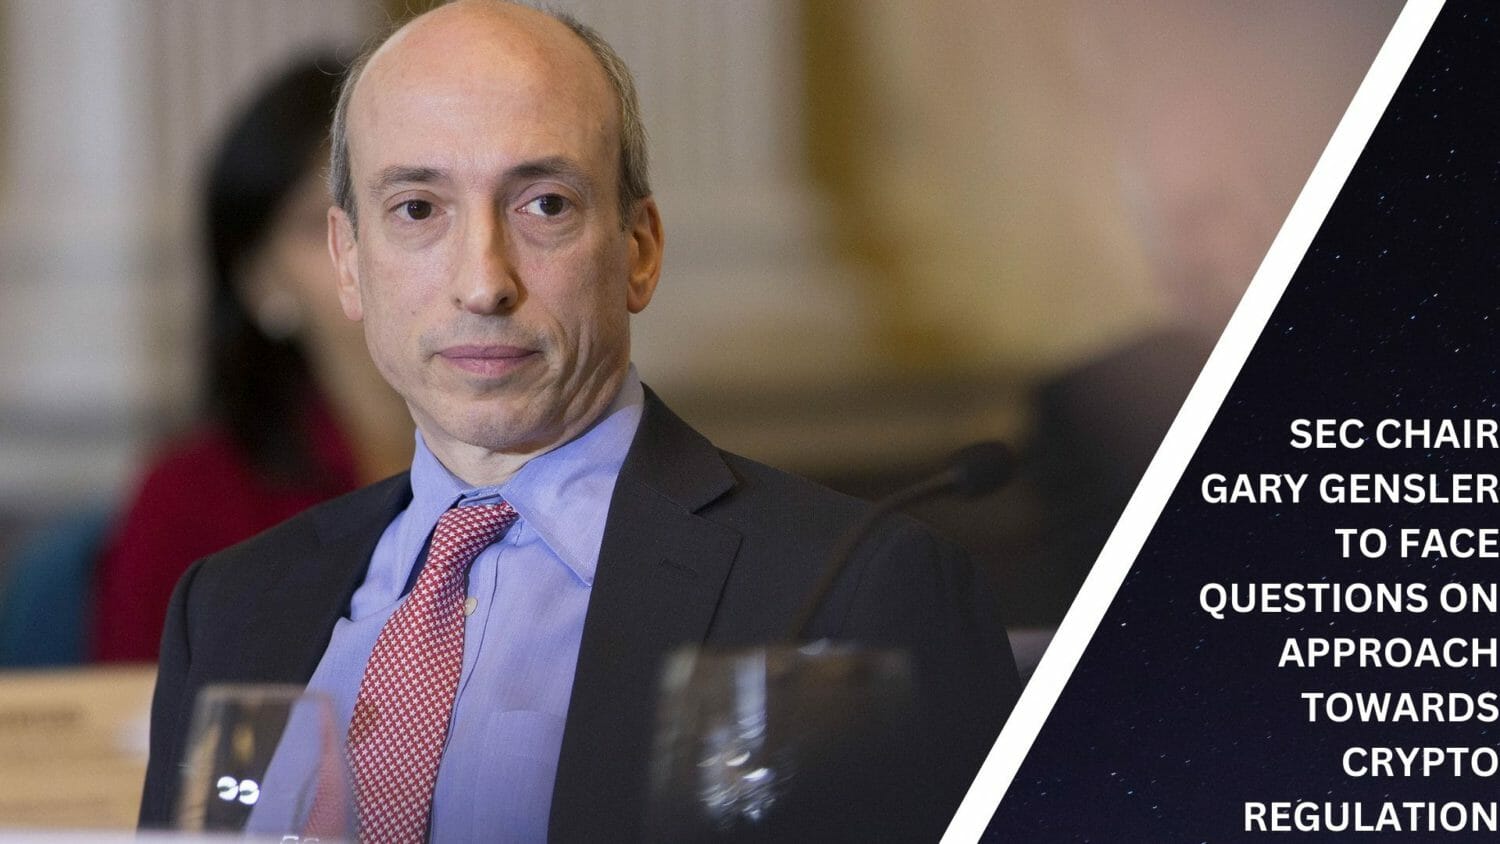 Sec Chair Gary Gensler To Face Questions On Approach Towards The Crypto Regulation